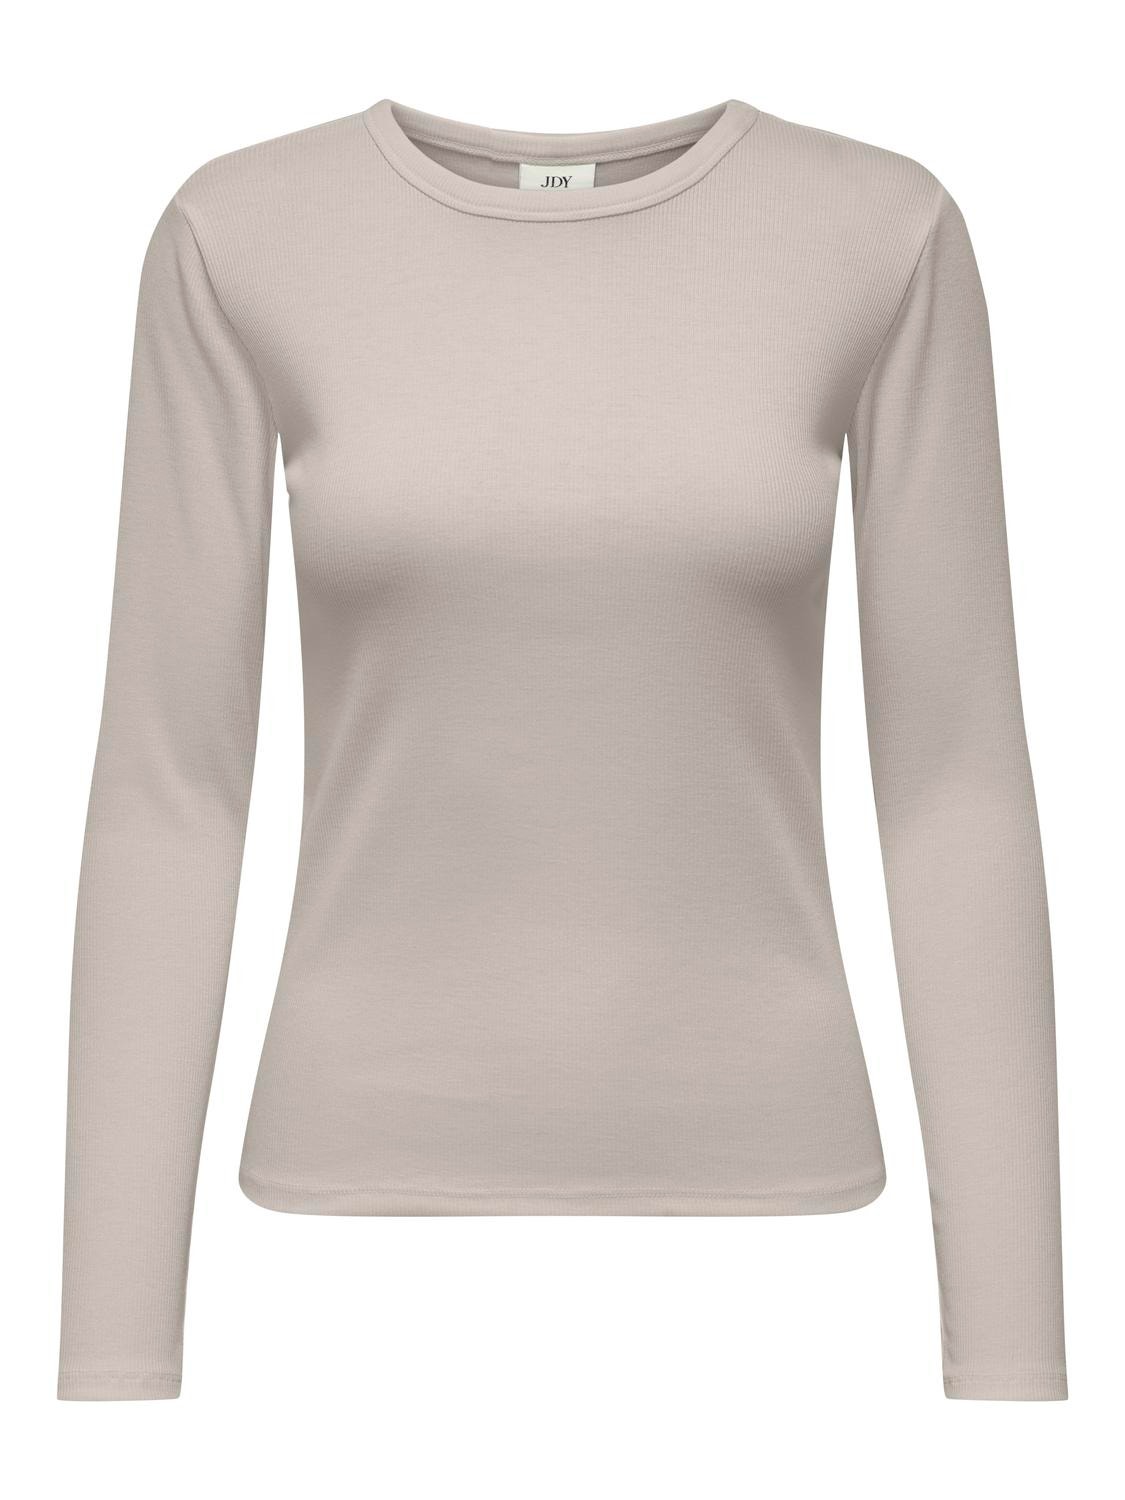 ONLY Regular Fit Round Neck Top -Chateau Gray - 15311088